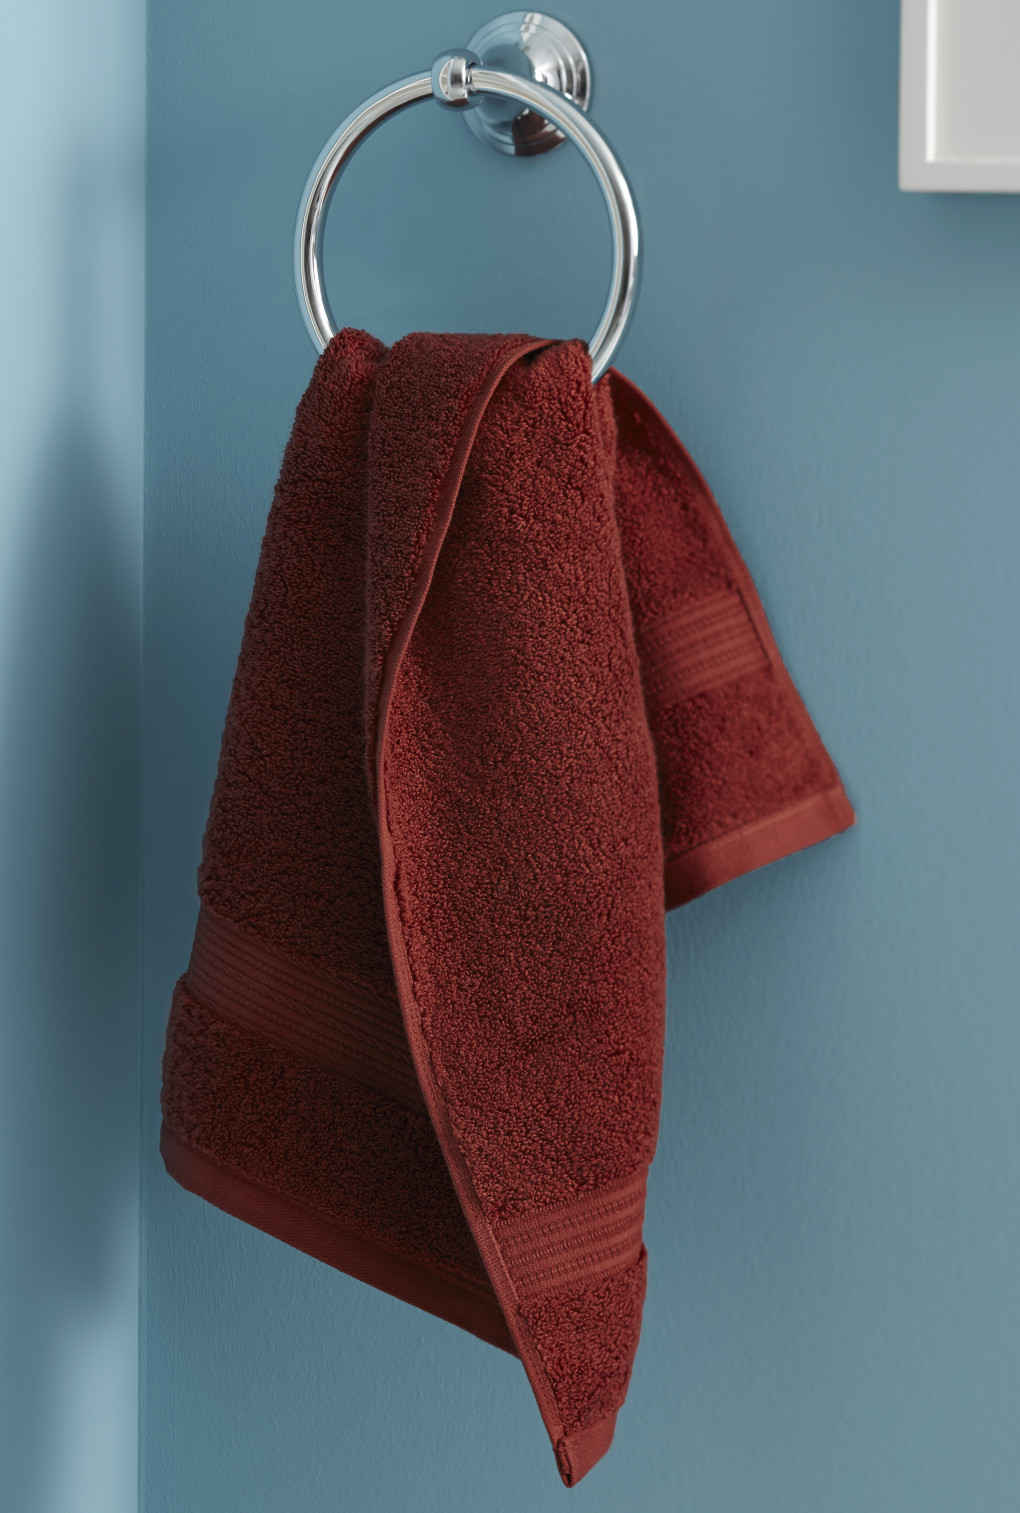 Royal Velvet Signature Soft Bath Towel and Rug Collection Rust Oxide